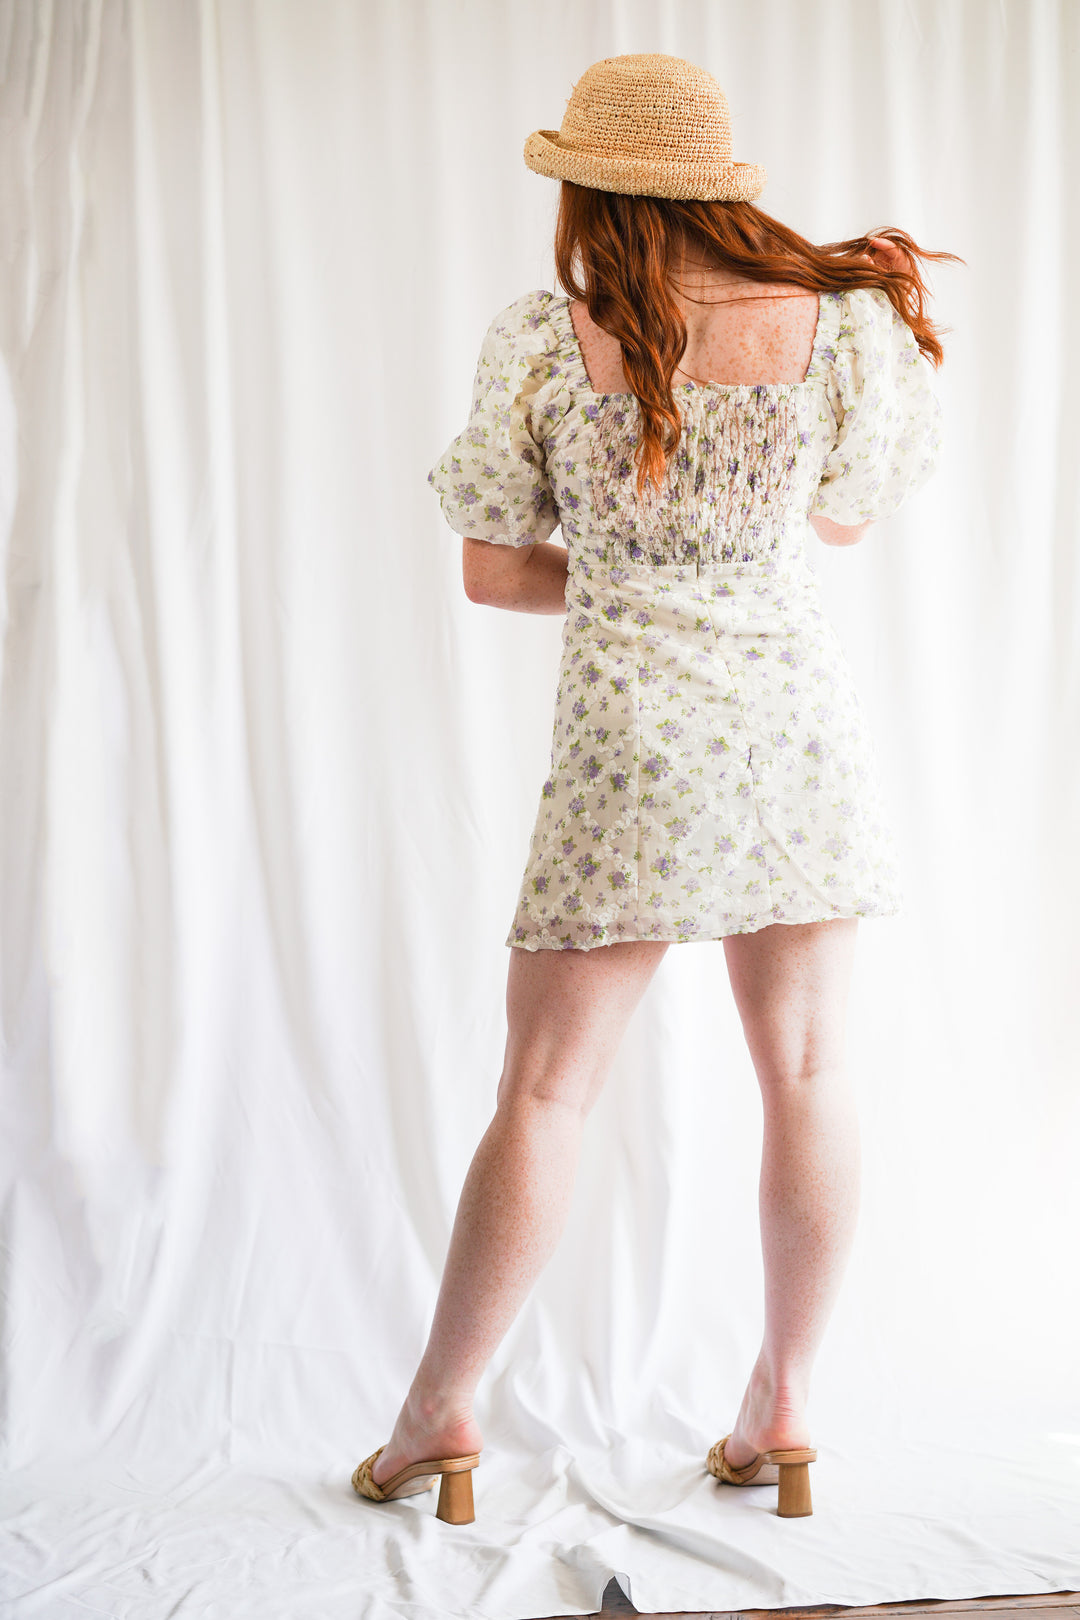 embroidered floral mini dress is fitted, has short puff sleeves and a smocked back for a flattering fit